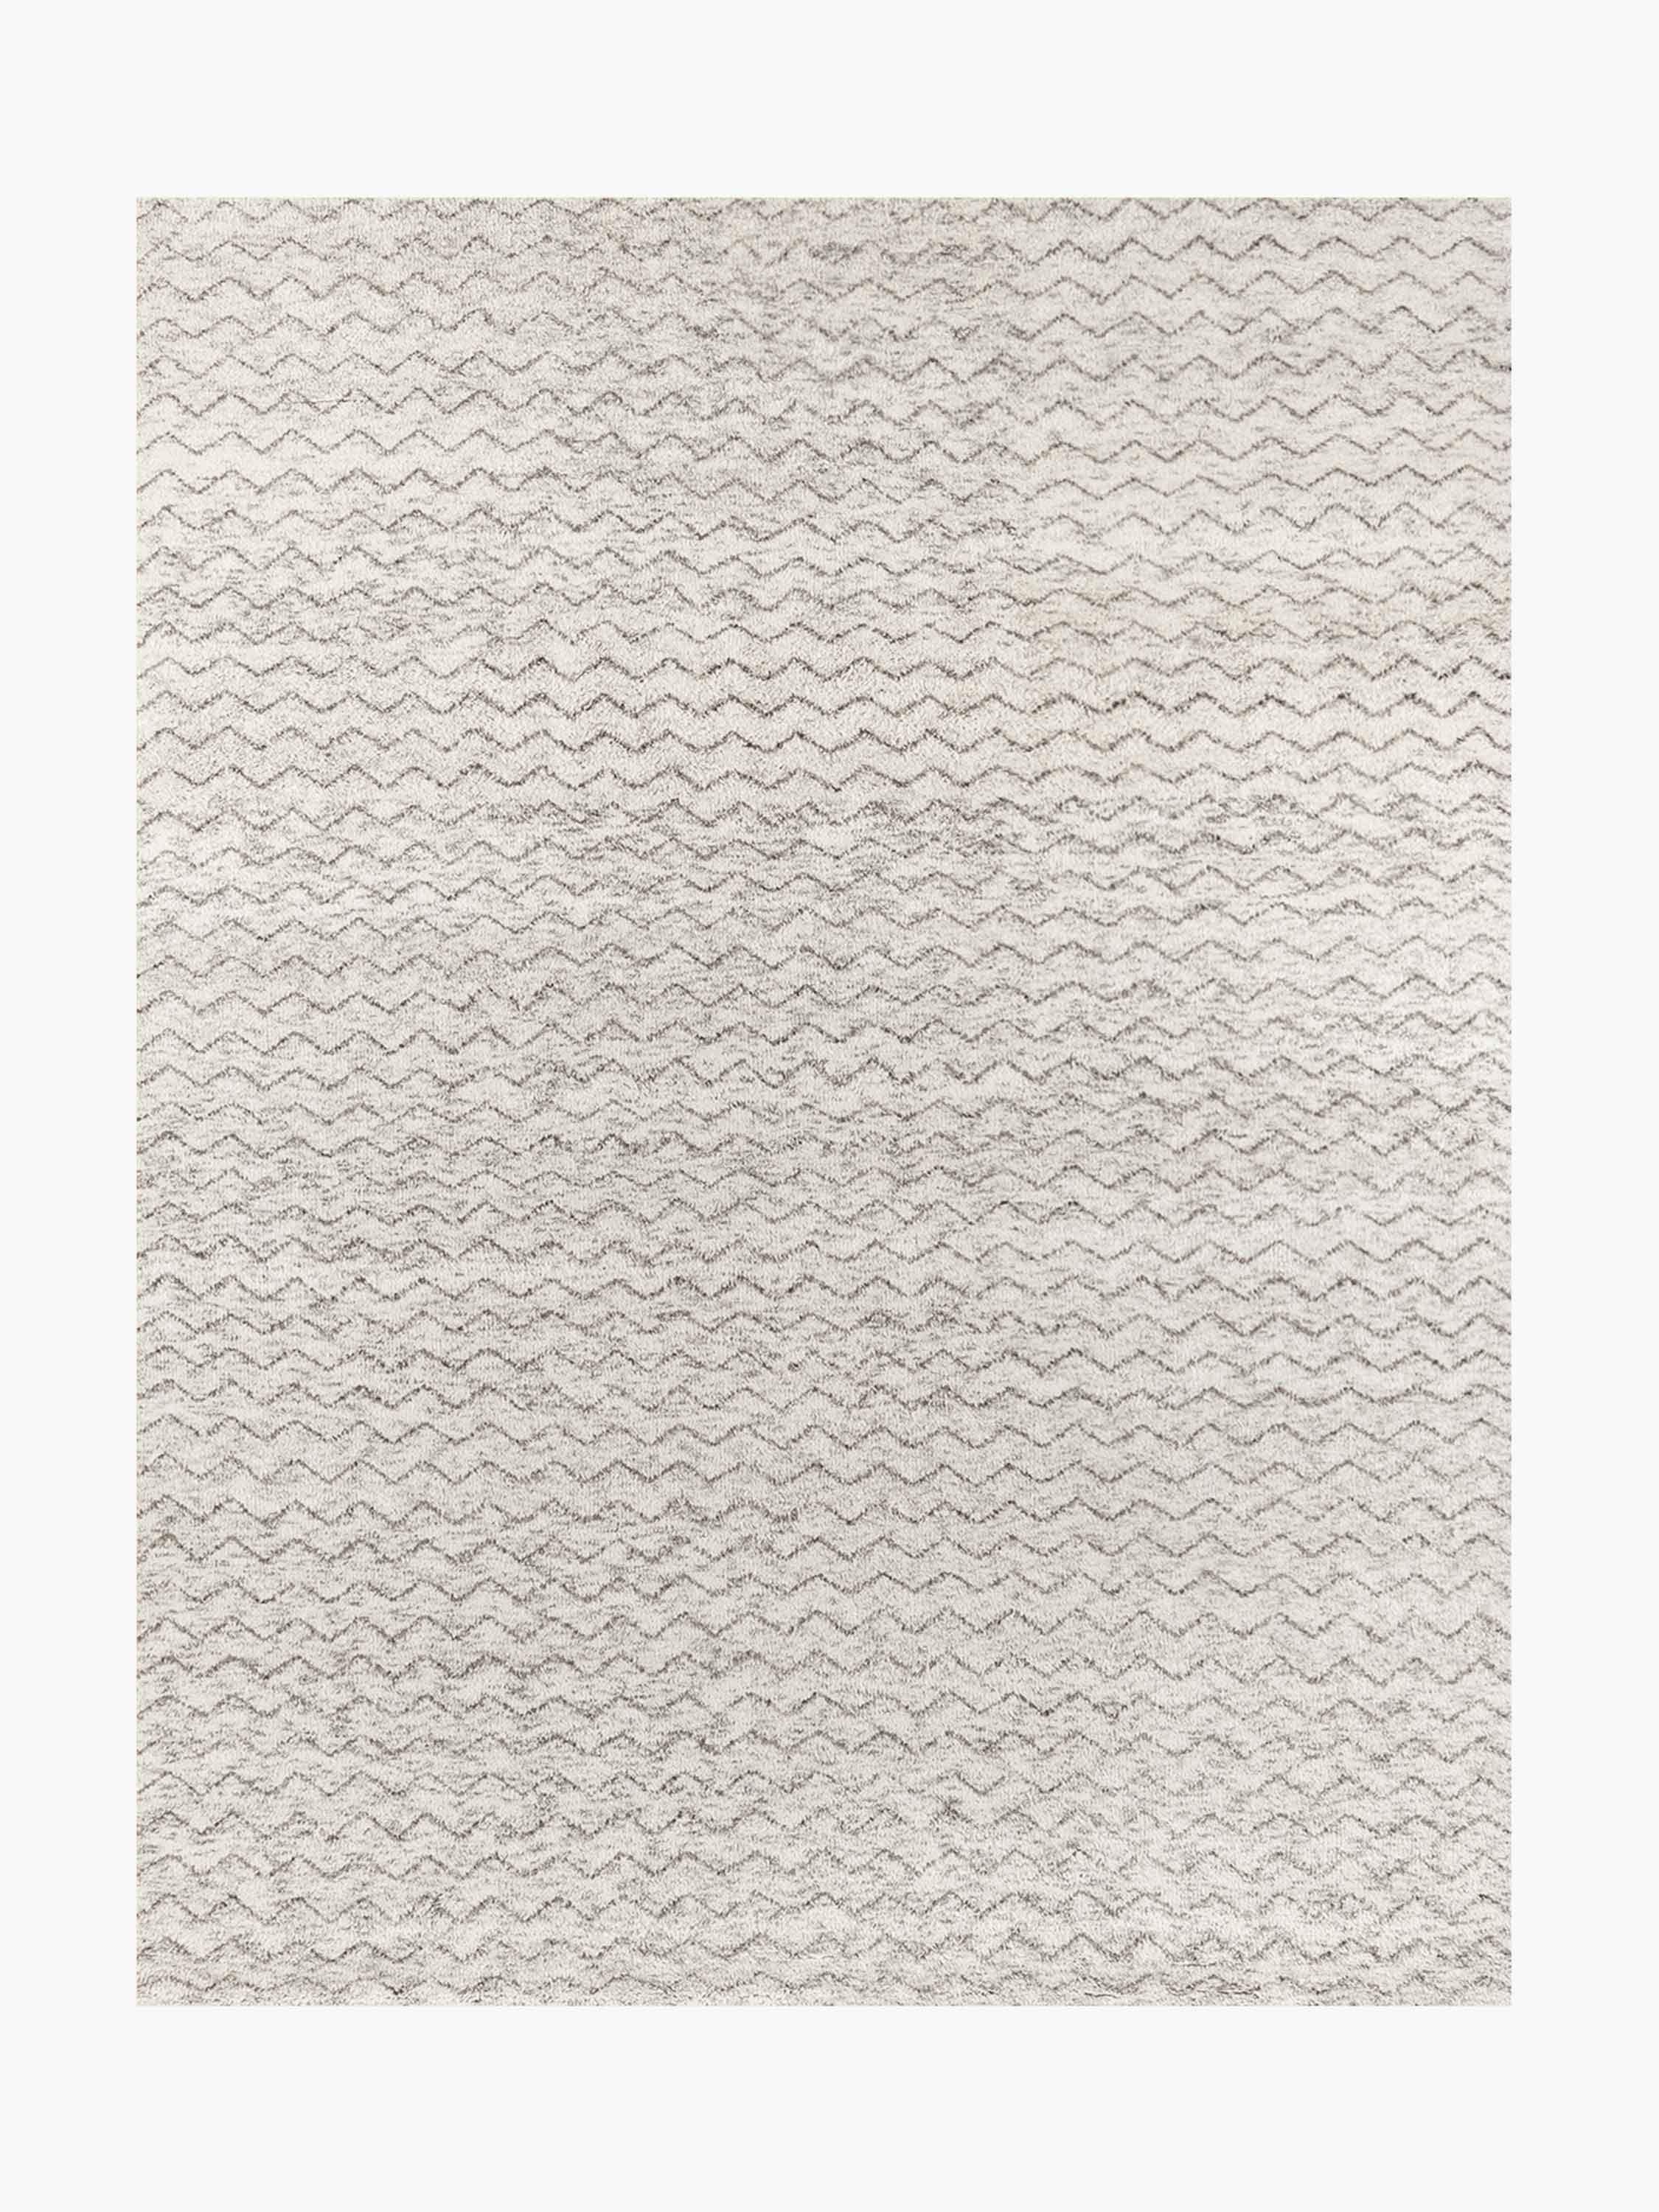 For Sale: Silver Ben Soleimani Mina Moroccan Rug– Ultra-plush Hand-knotted Zigzag Grey 12'x15'